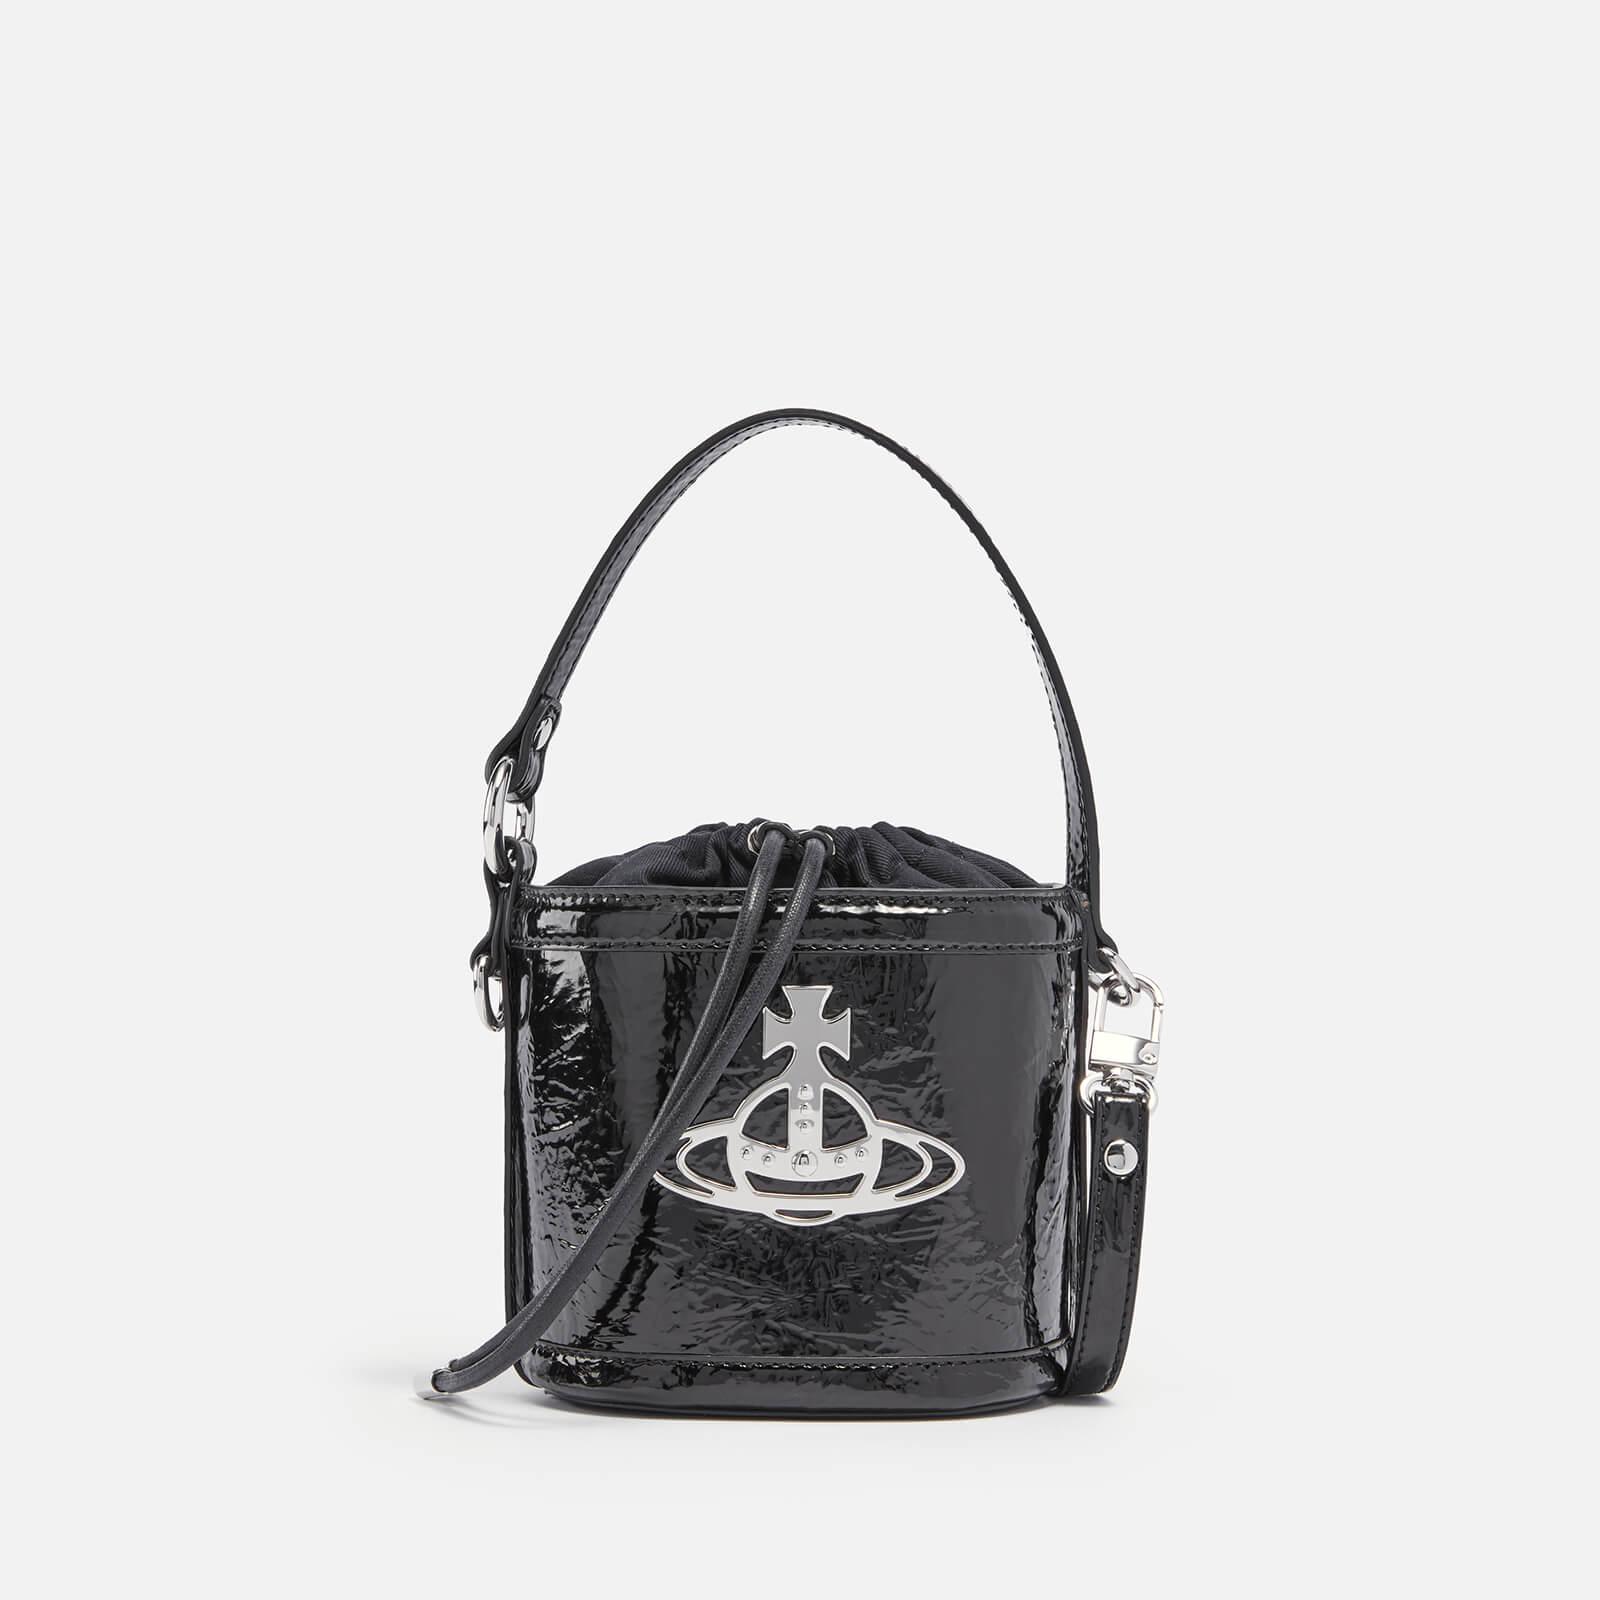 Vivienne Westwood Daisy Patent Leather Bucket Bag in Black | Lyst